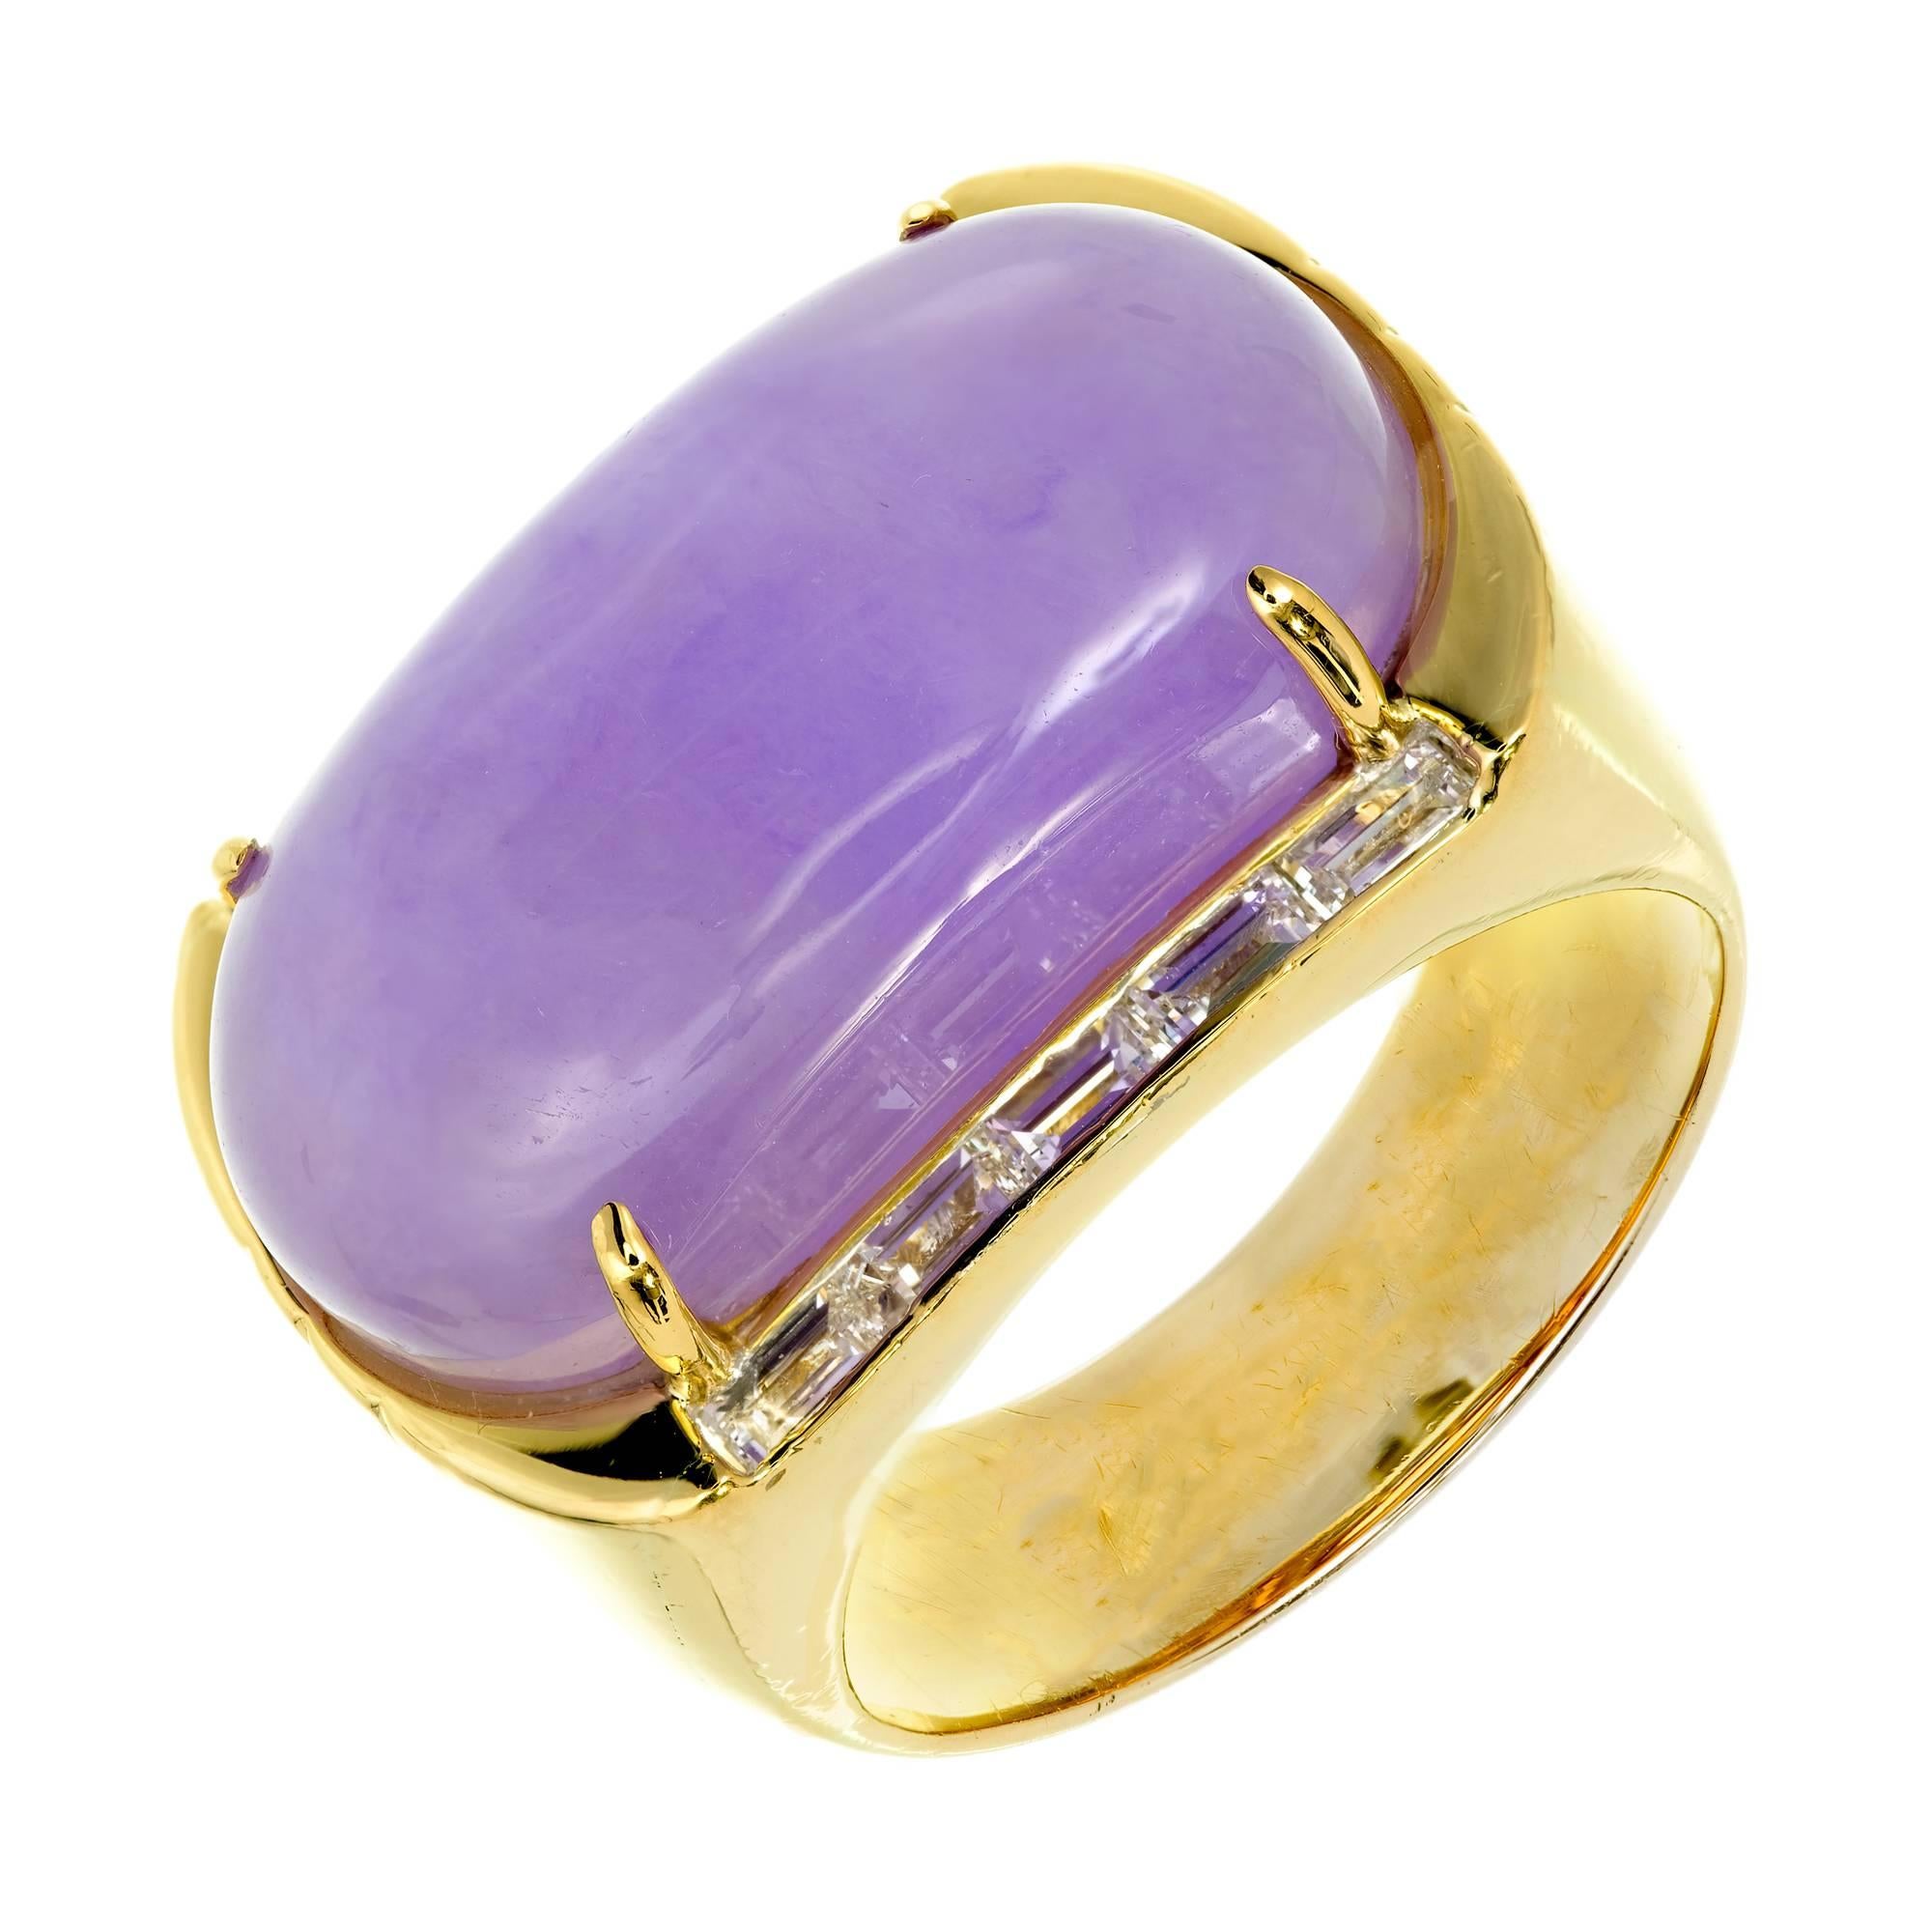 Natural untreated bright purple Jadeite Jade oval cabochon cocktail ring in 18k yellow gold with fine baguette Diamonds. For either a man or a woman.  GIA certified natural Jadeite Jade.

1 oval cabochon purple Jadeite Jade, 23.72 x 12.09 x 7.31mm,